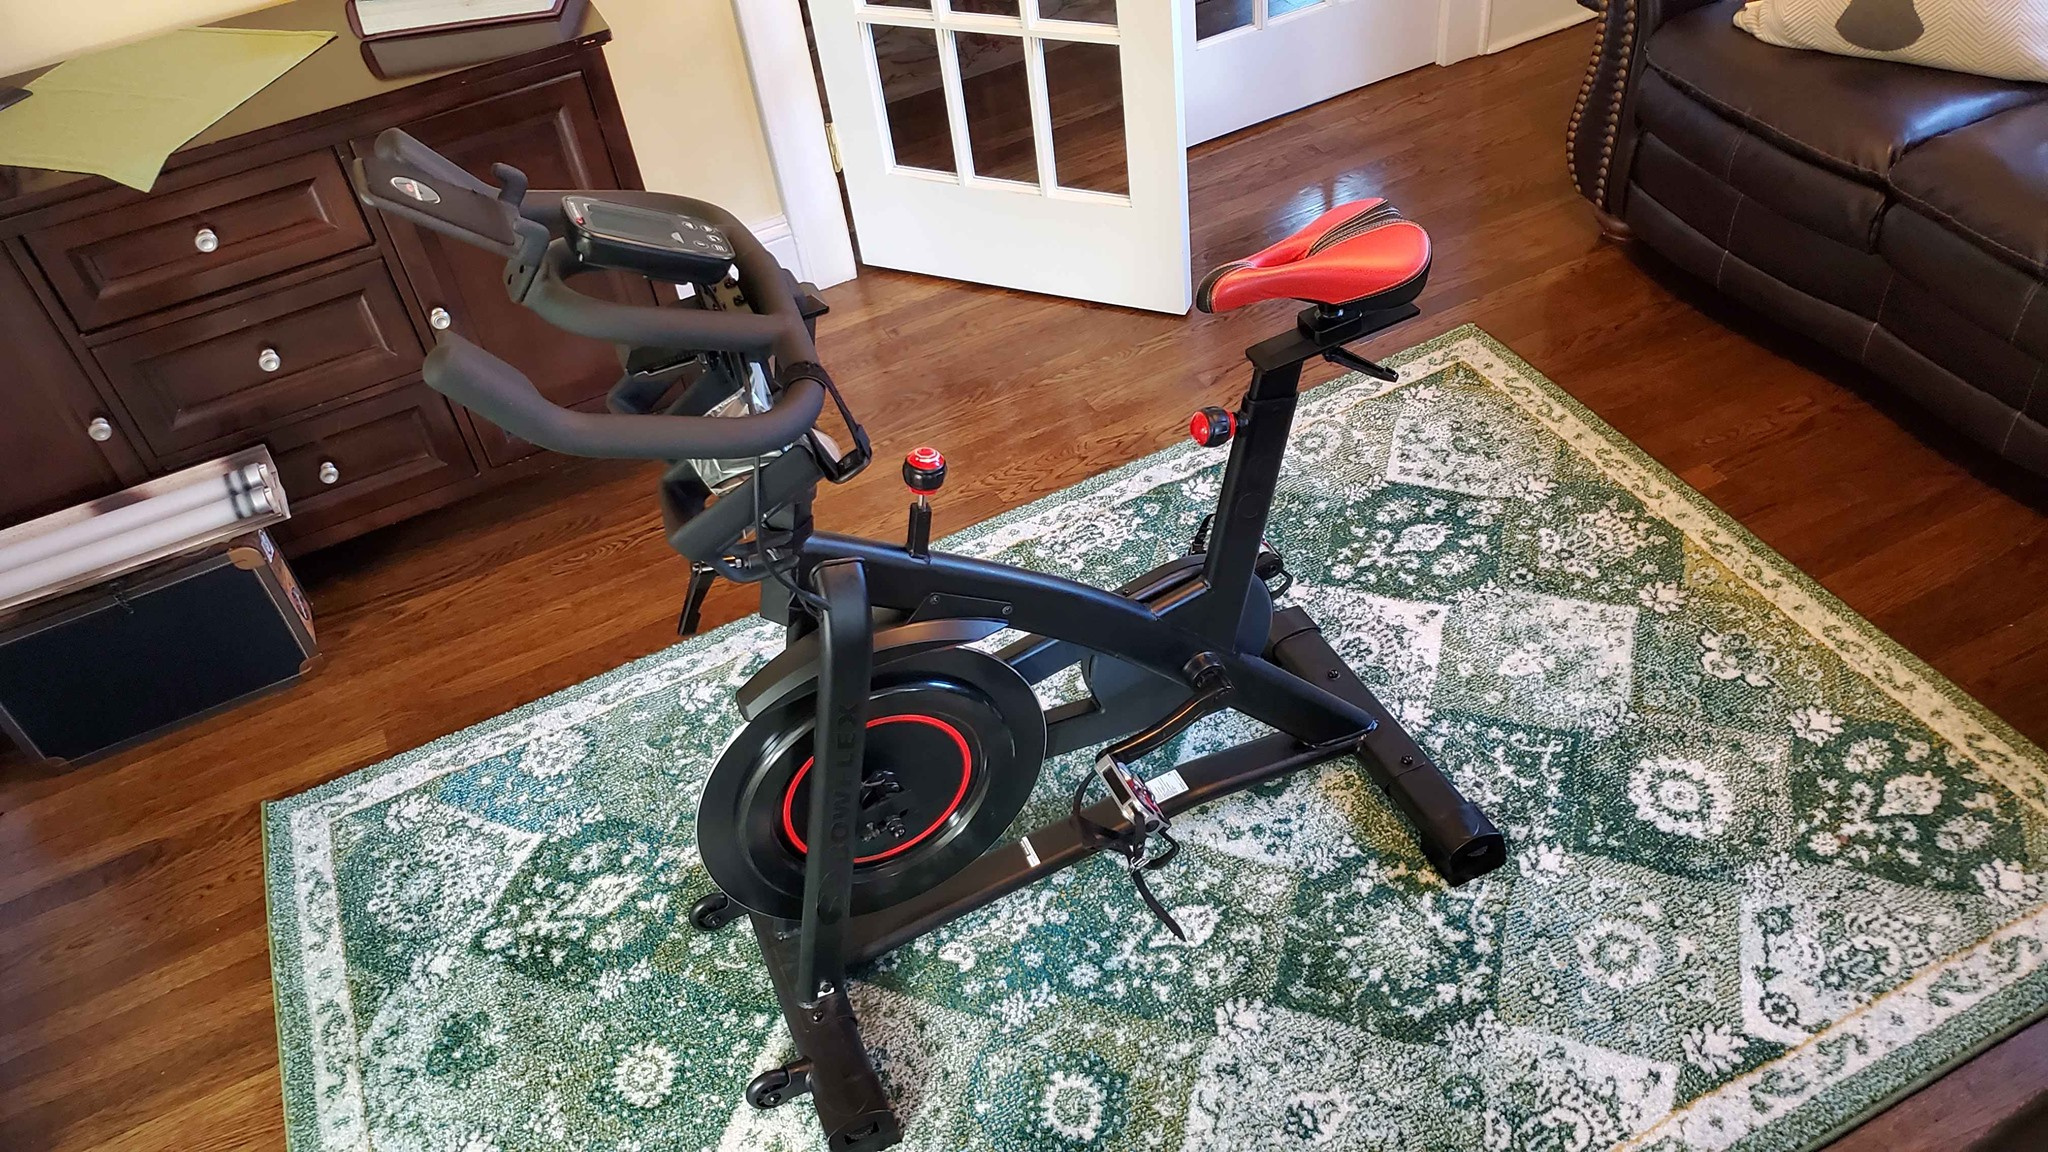 Comparing the look of the Schwinn IC4 and the Bowflex C6